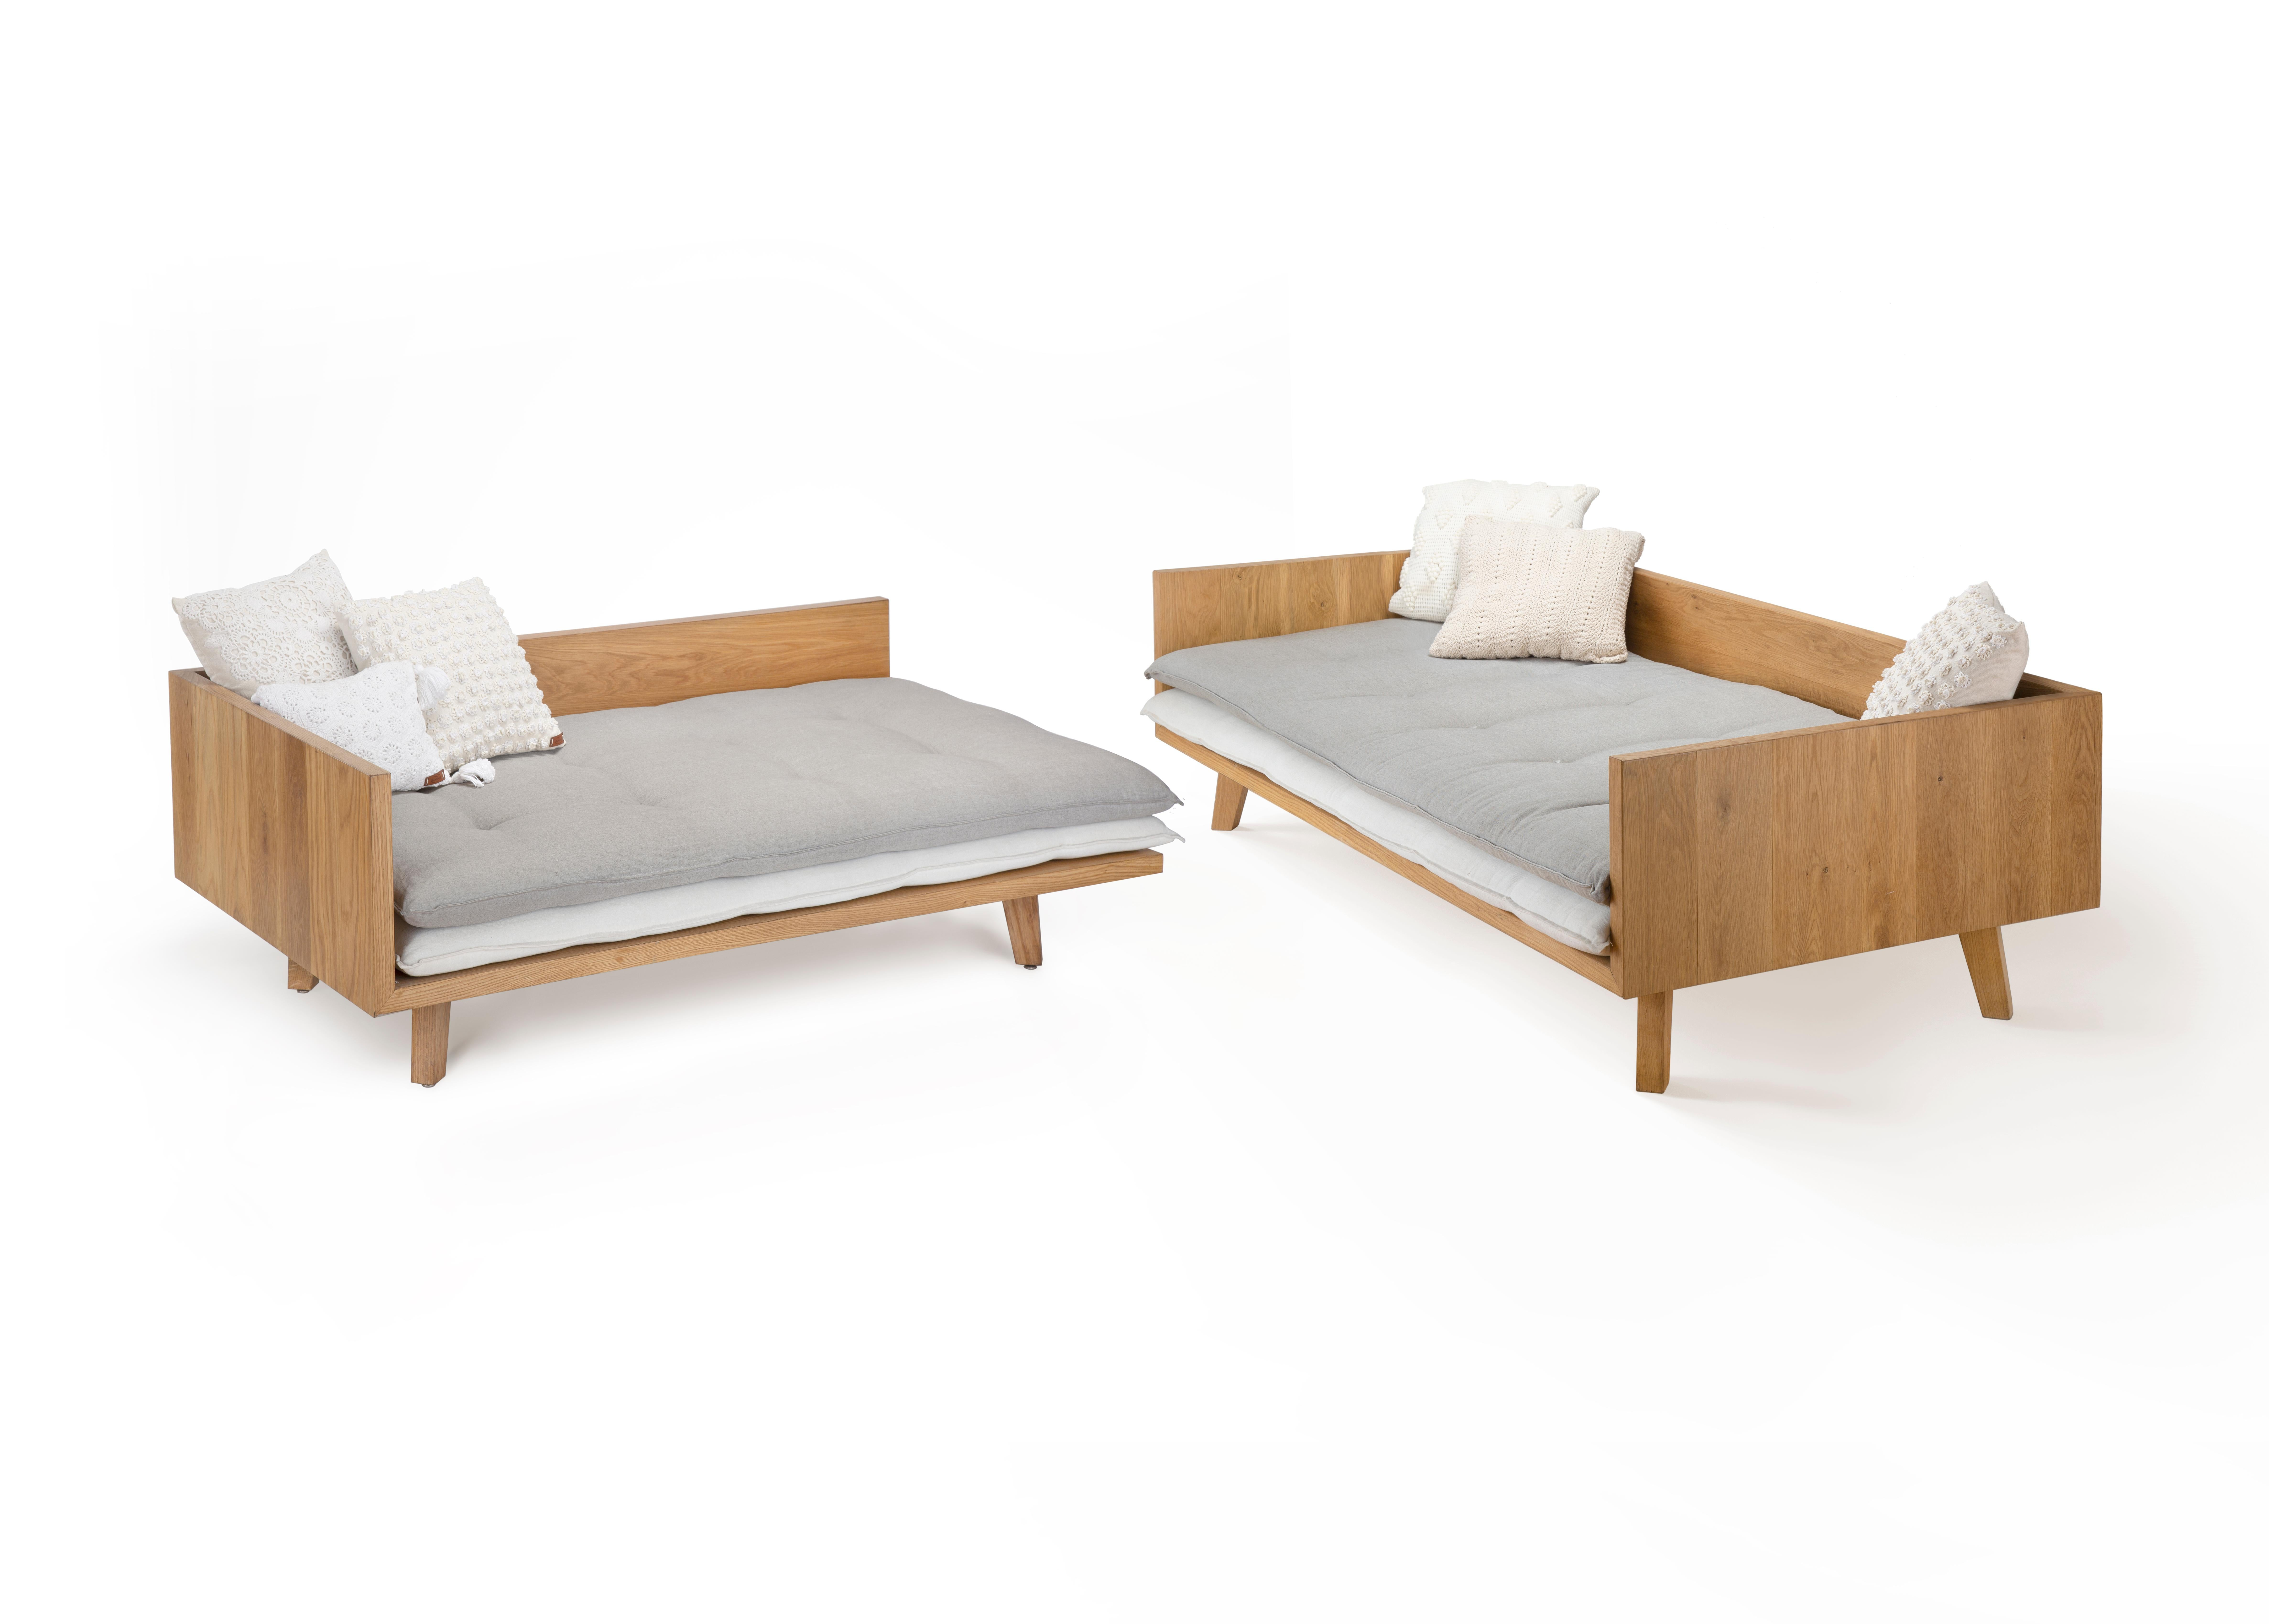 Modern Outdoor Oil-Treated Oak Wood 3 Seater Sofa with Double Mattresses For Sale